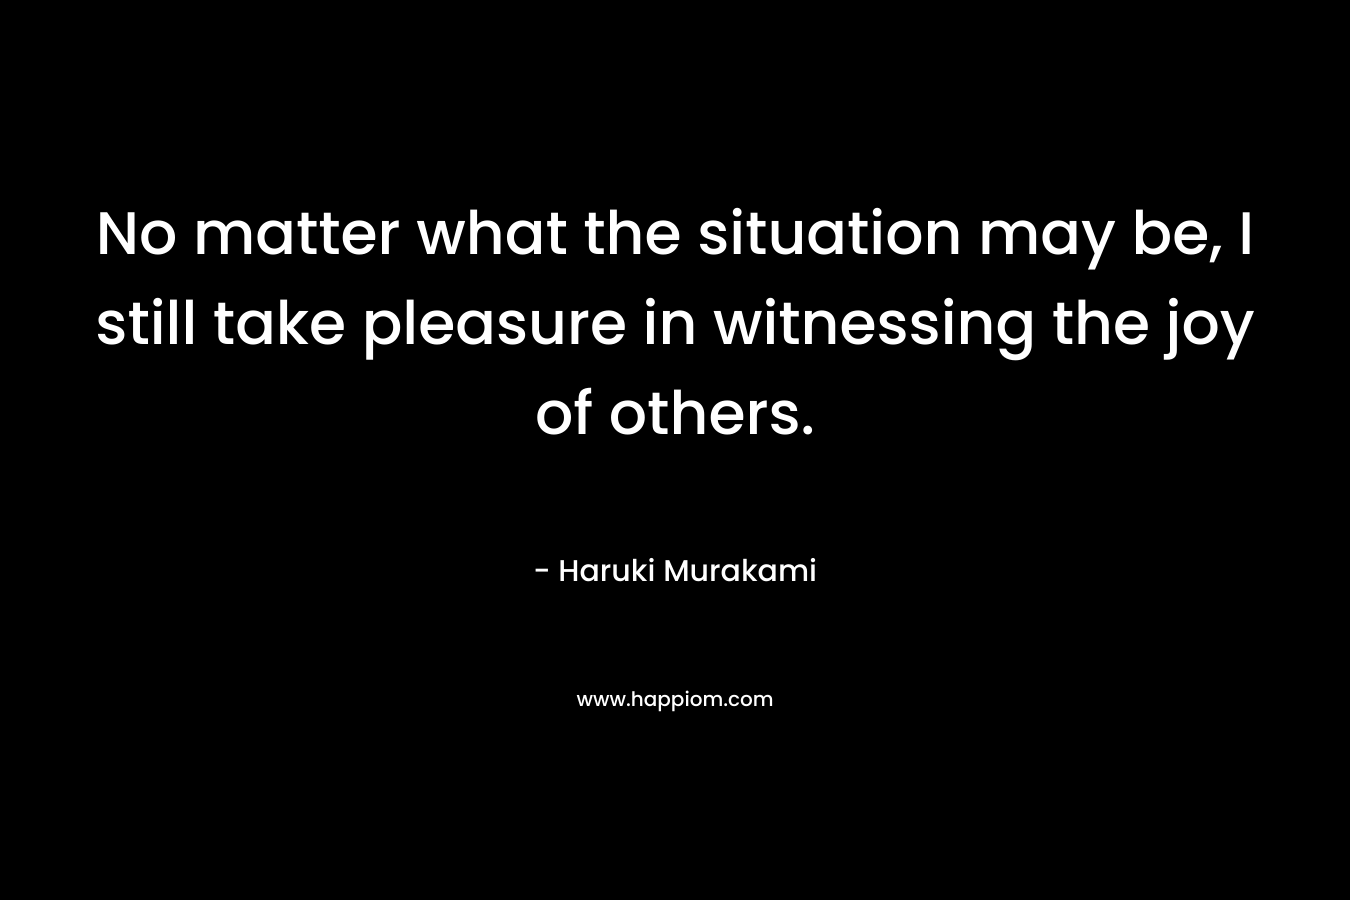 No matter what the situation may be, I still take pleasure in witnessing the joy of others. – Haruki Murakami